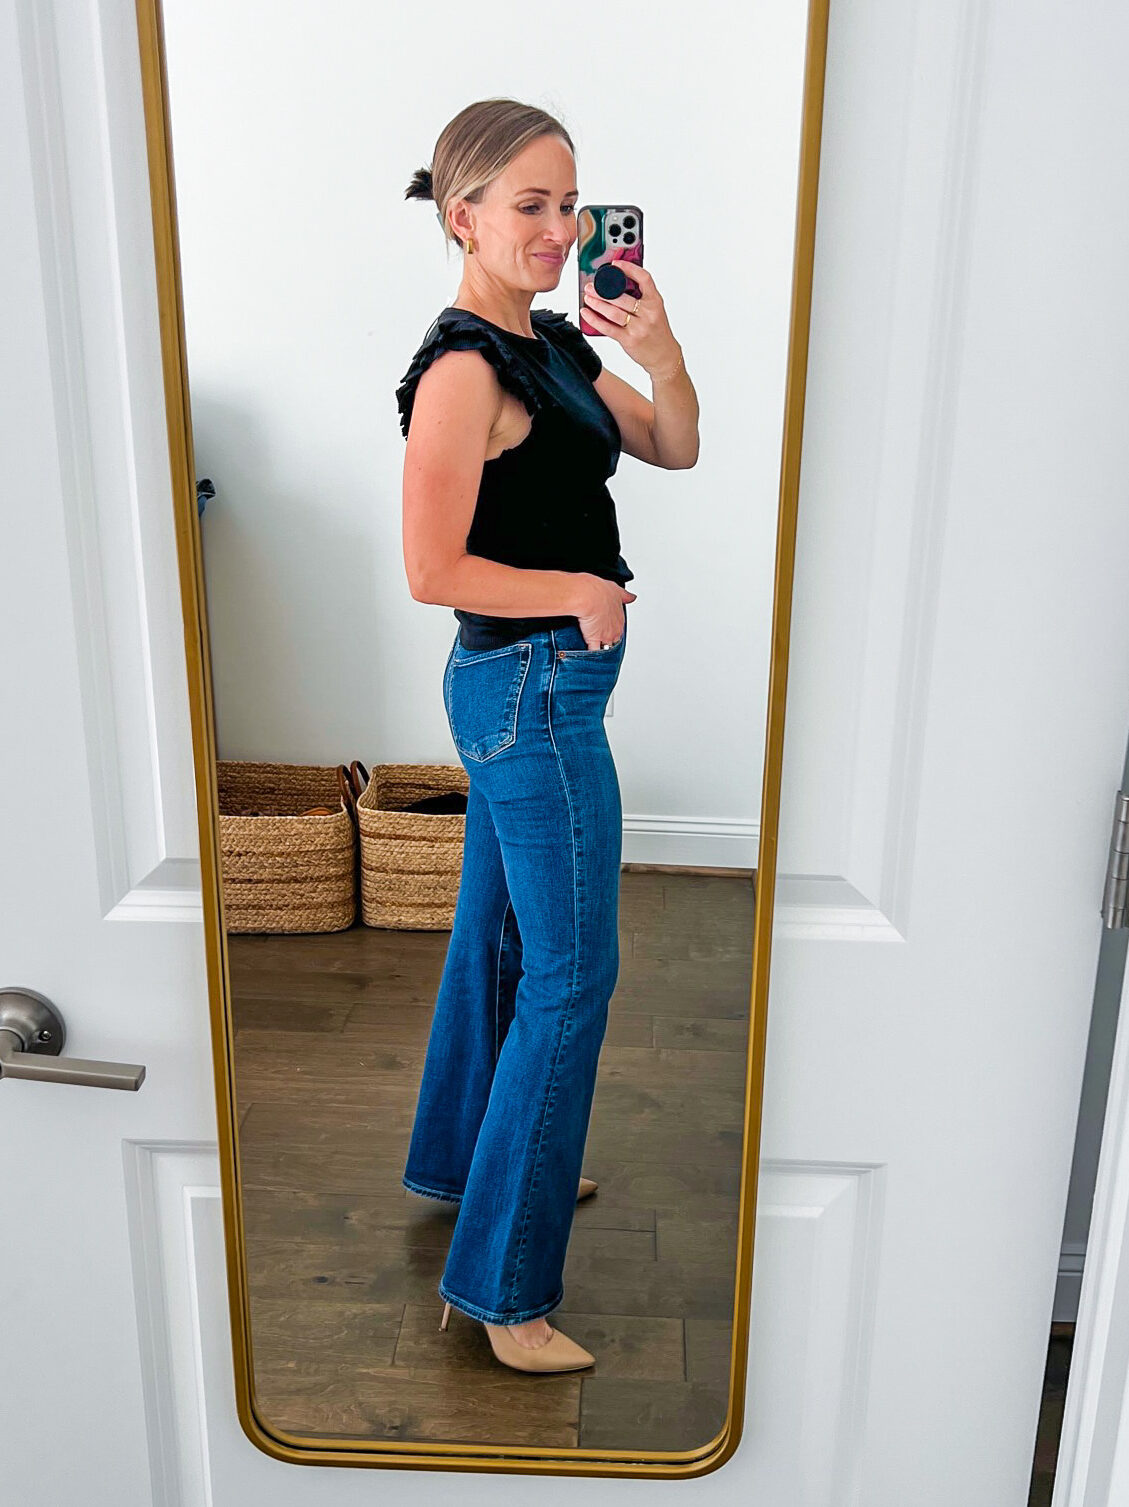 TeriLyn Adams showing the side details of one of the Best Abercrombie Jeans in Ultra High Rise Flare Jean in black and dark blue wash